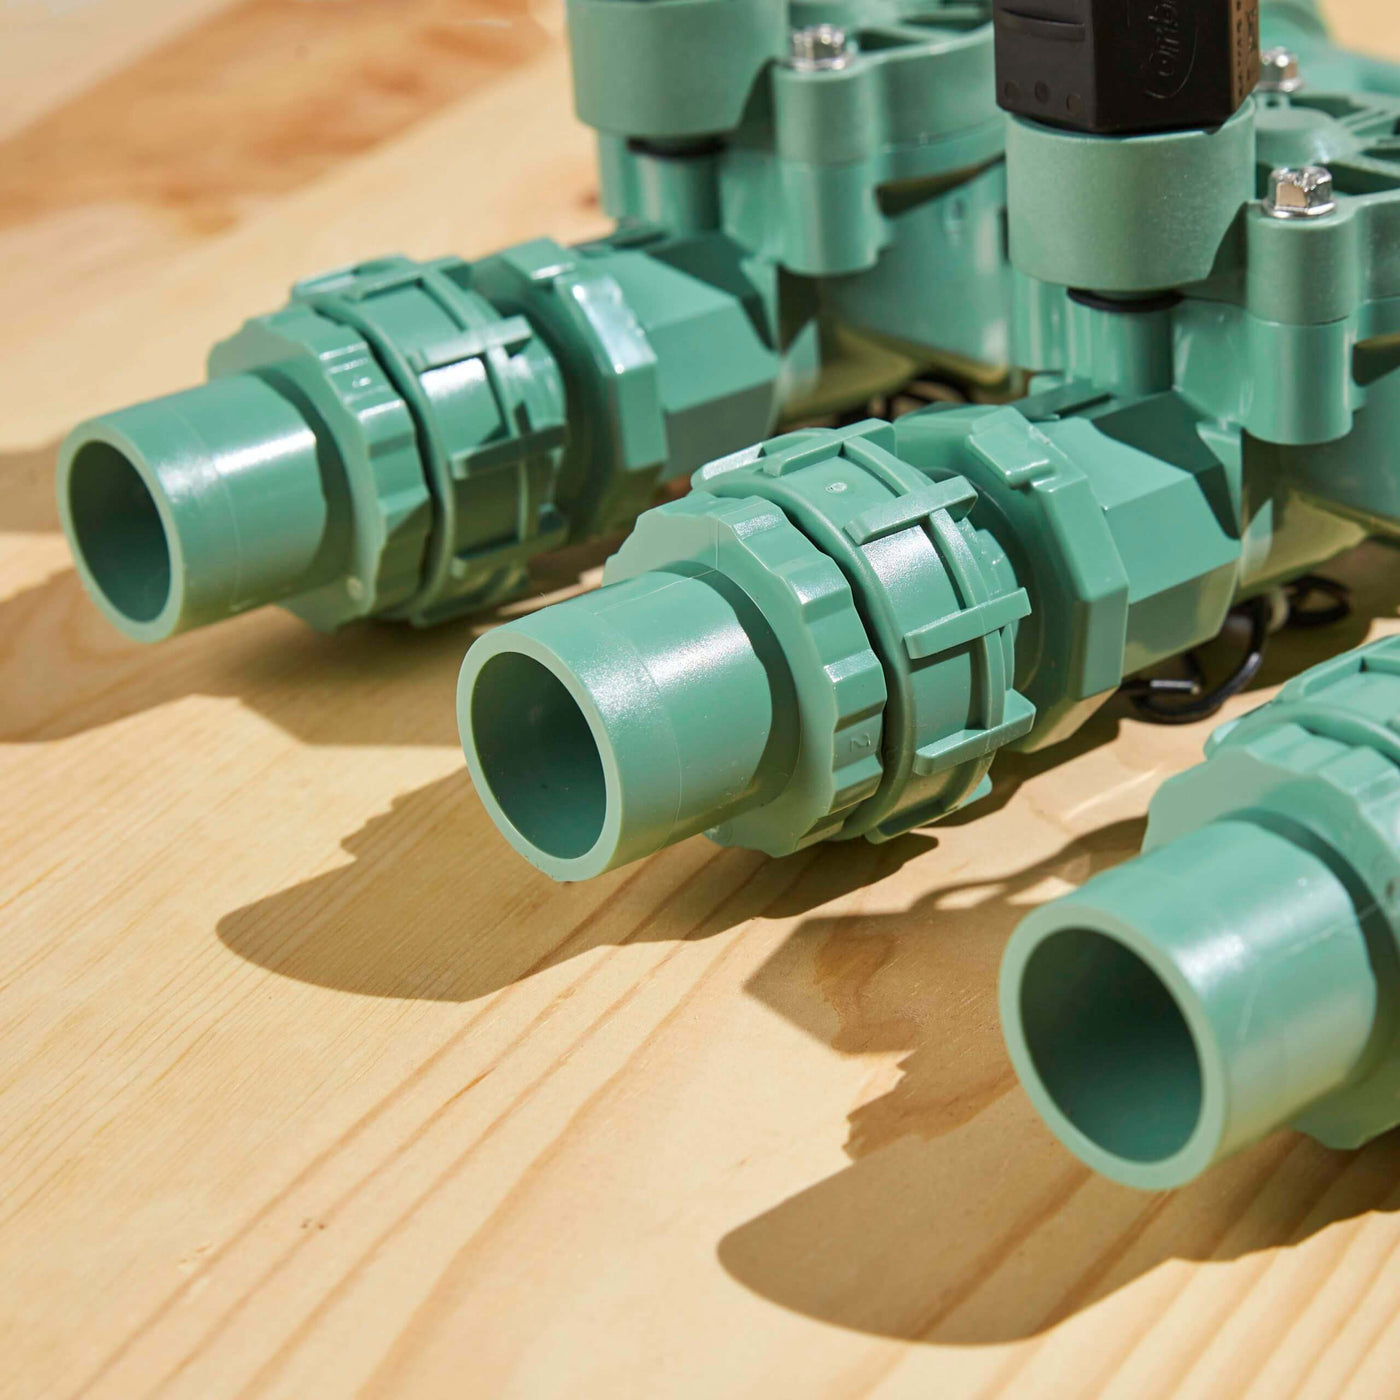 57253 - The preassembled sprinkler valve manifold can connect to both ¾-inch and 1-inch PVC pipes. 